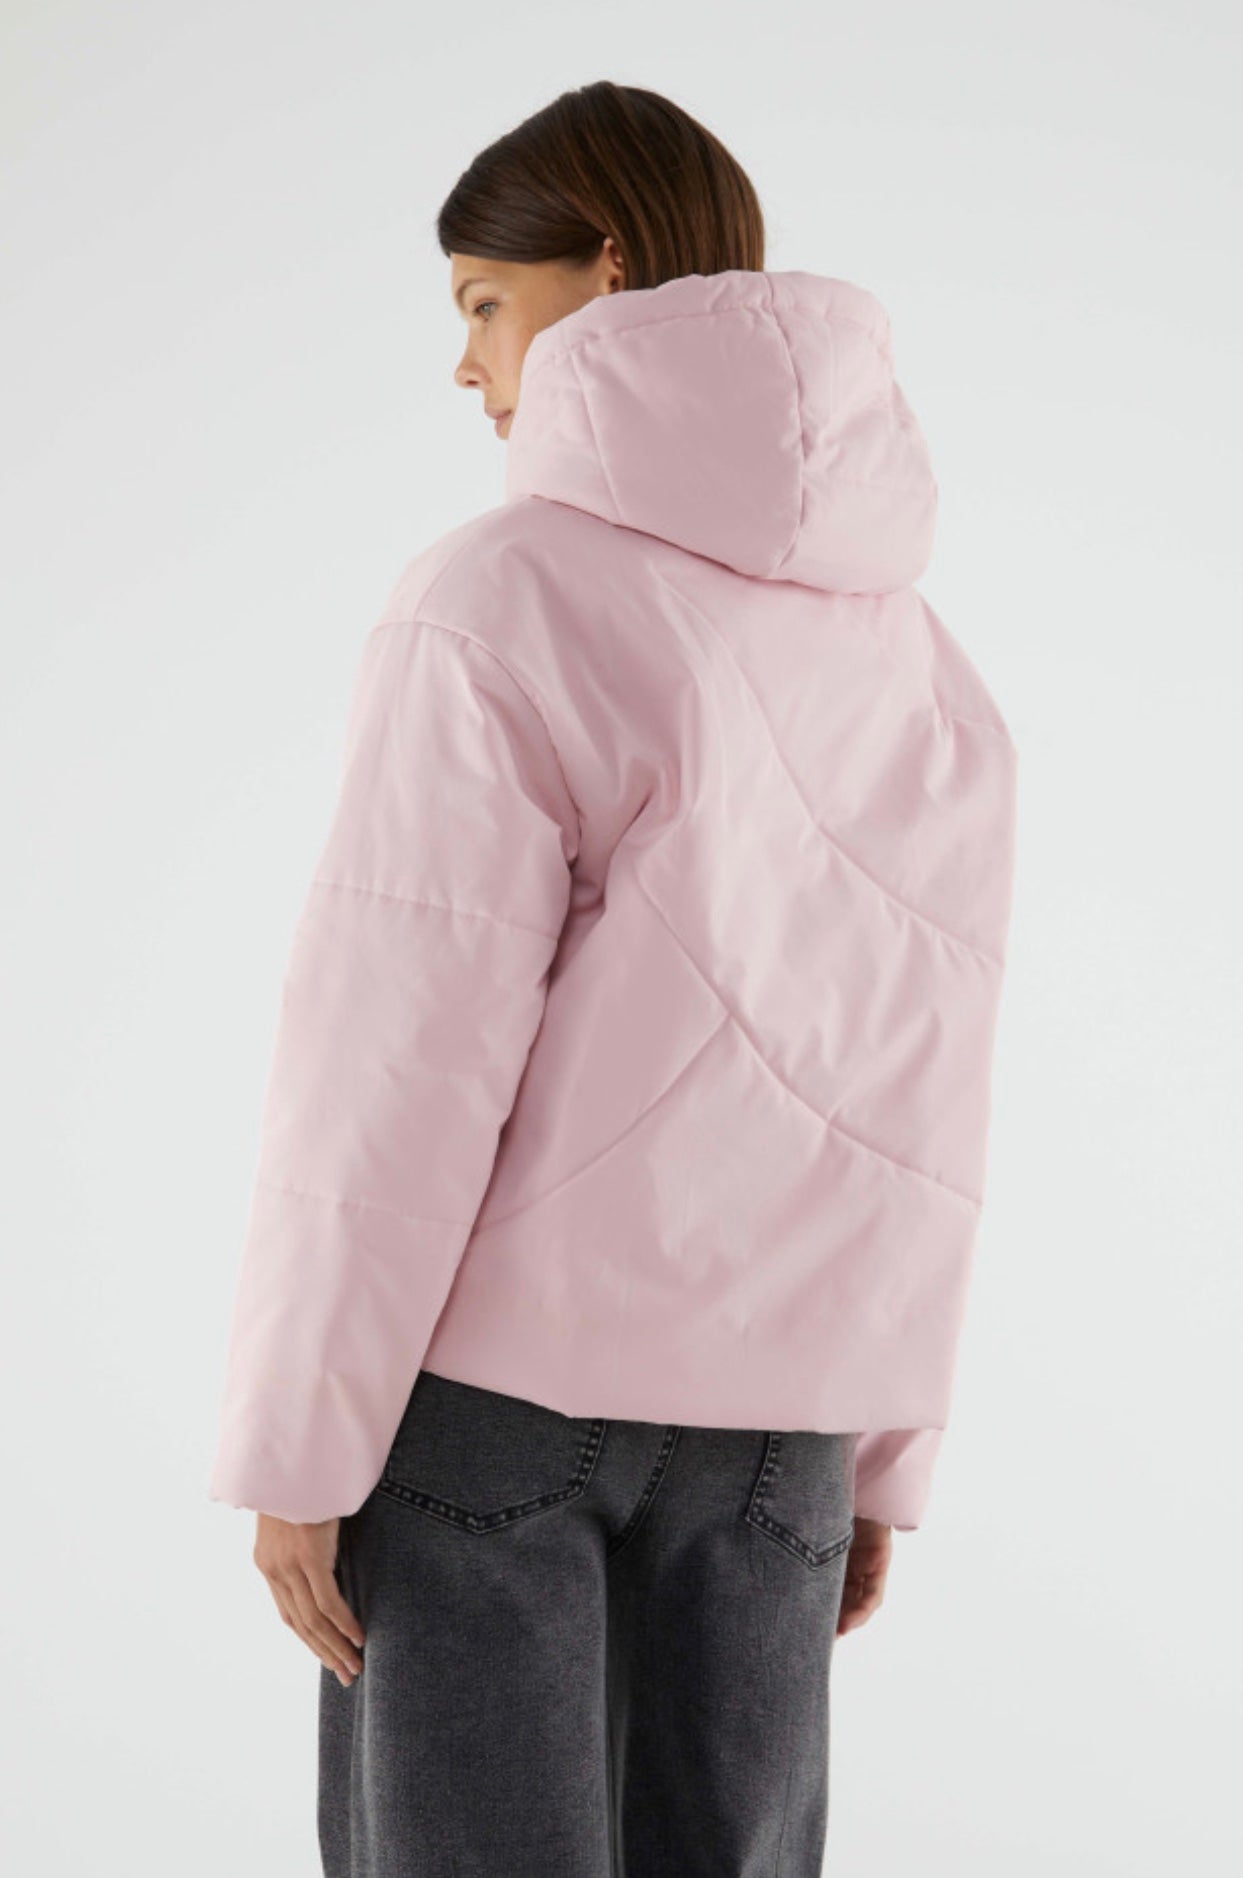 Compañia Fantastica - Pink hooded down jacket